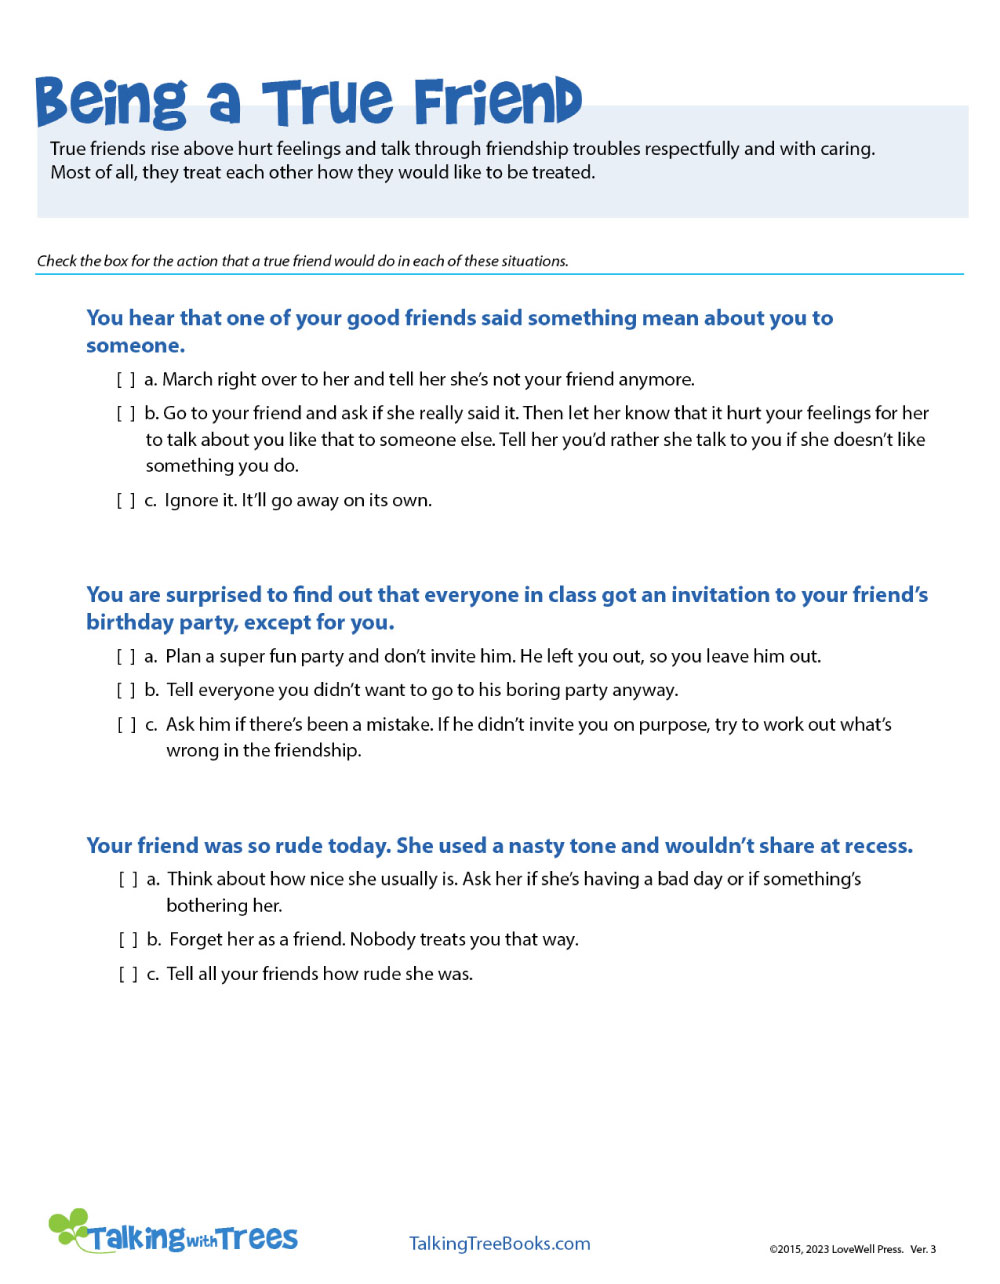 Treating others with Respect- Kids Social Emotional Learning Worksheet - SEL